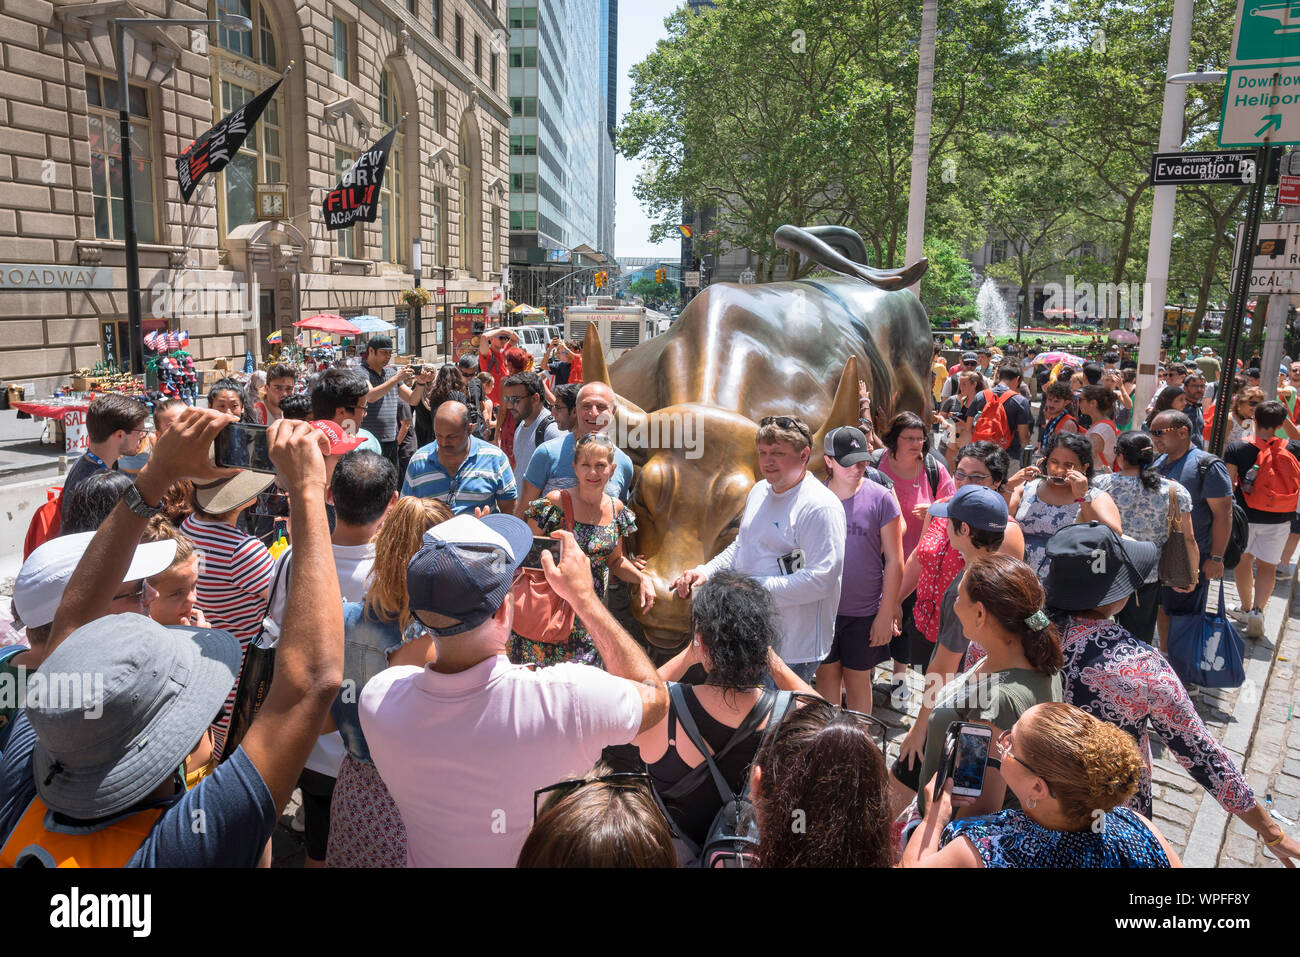 New York tourism, view in summer of tourists crowding the Charging Bull sculpture on Broadway in Lower Manhattan, New York City, USA Stock Photo